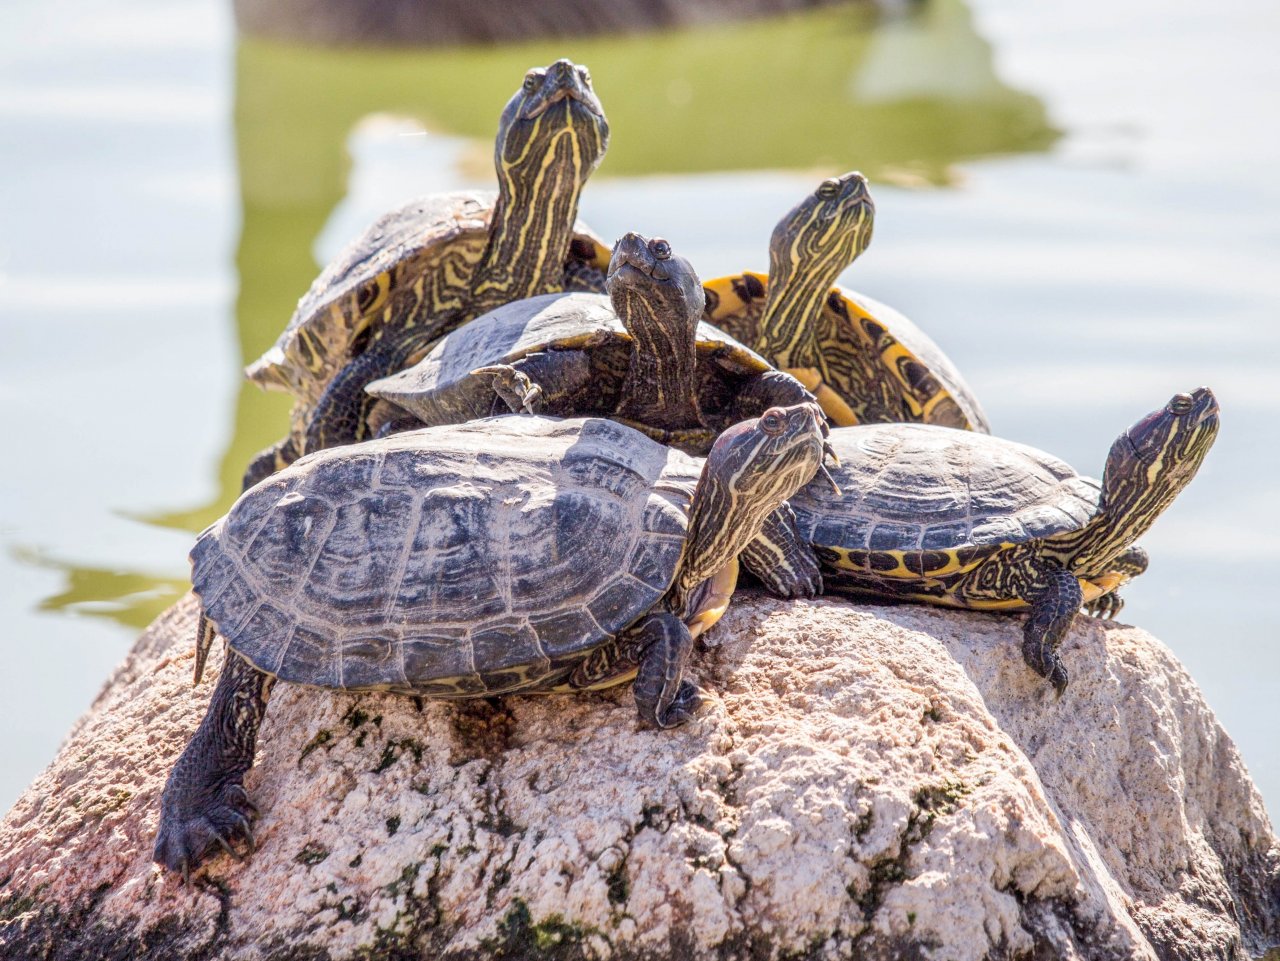 Turtles on the stone jigsaw puzzle